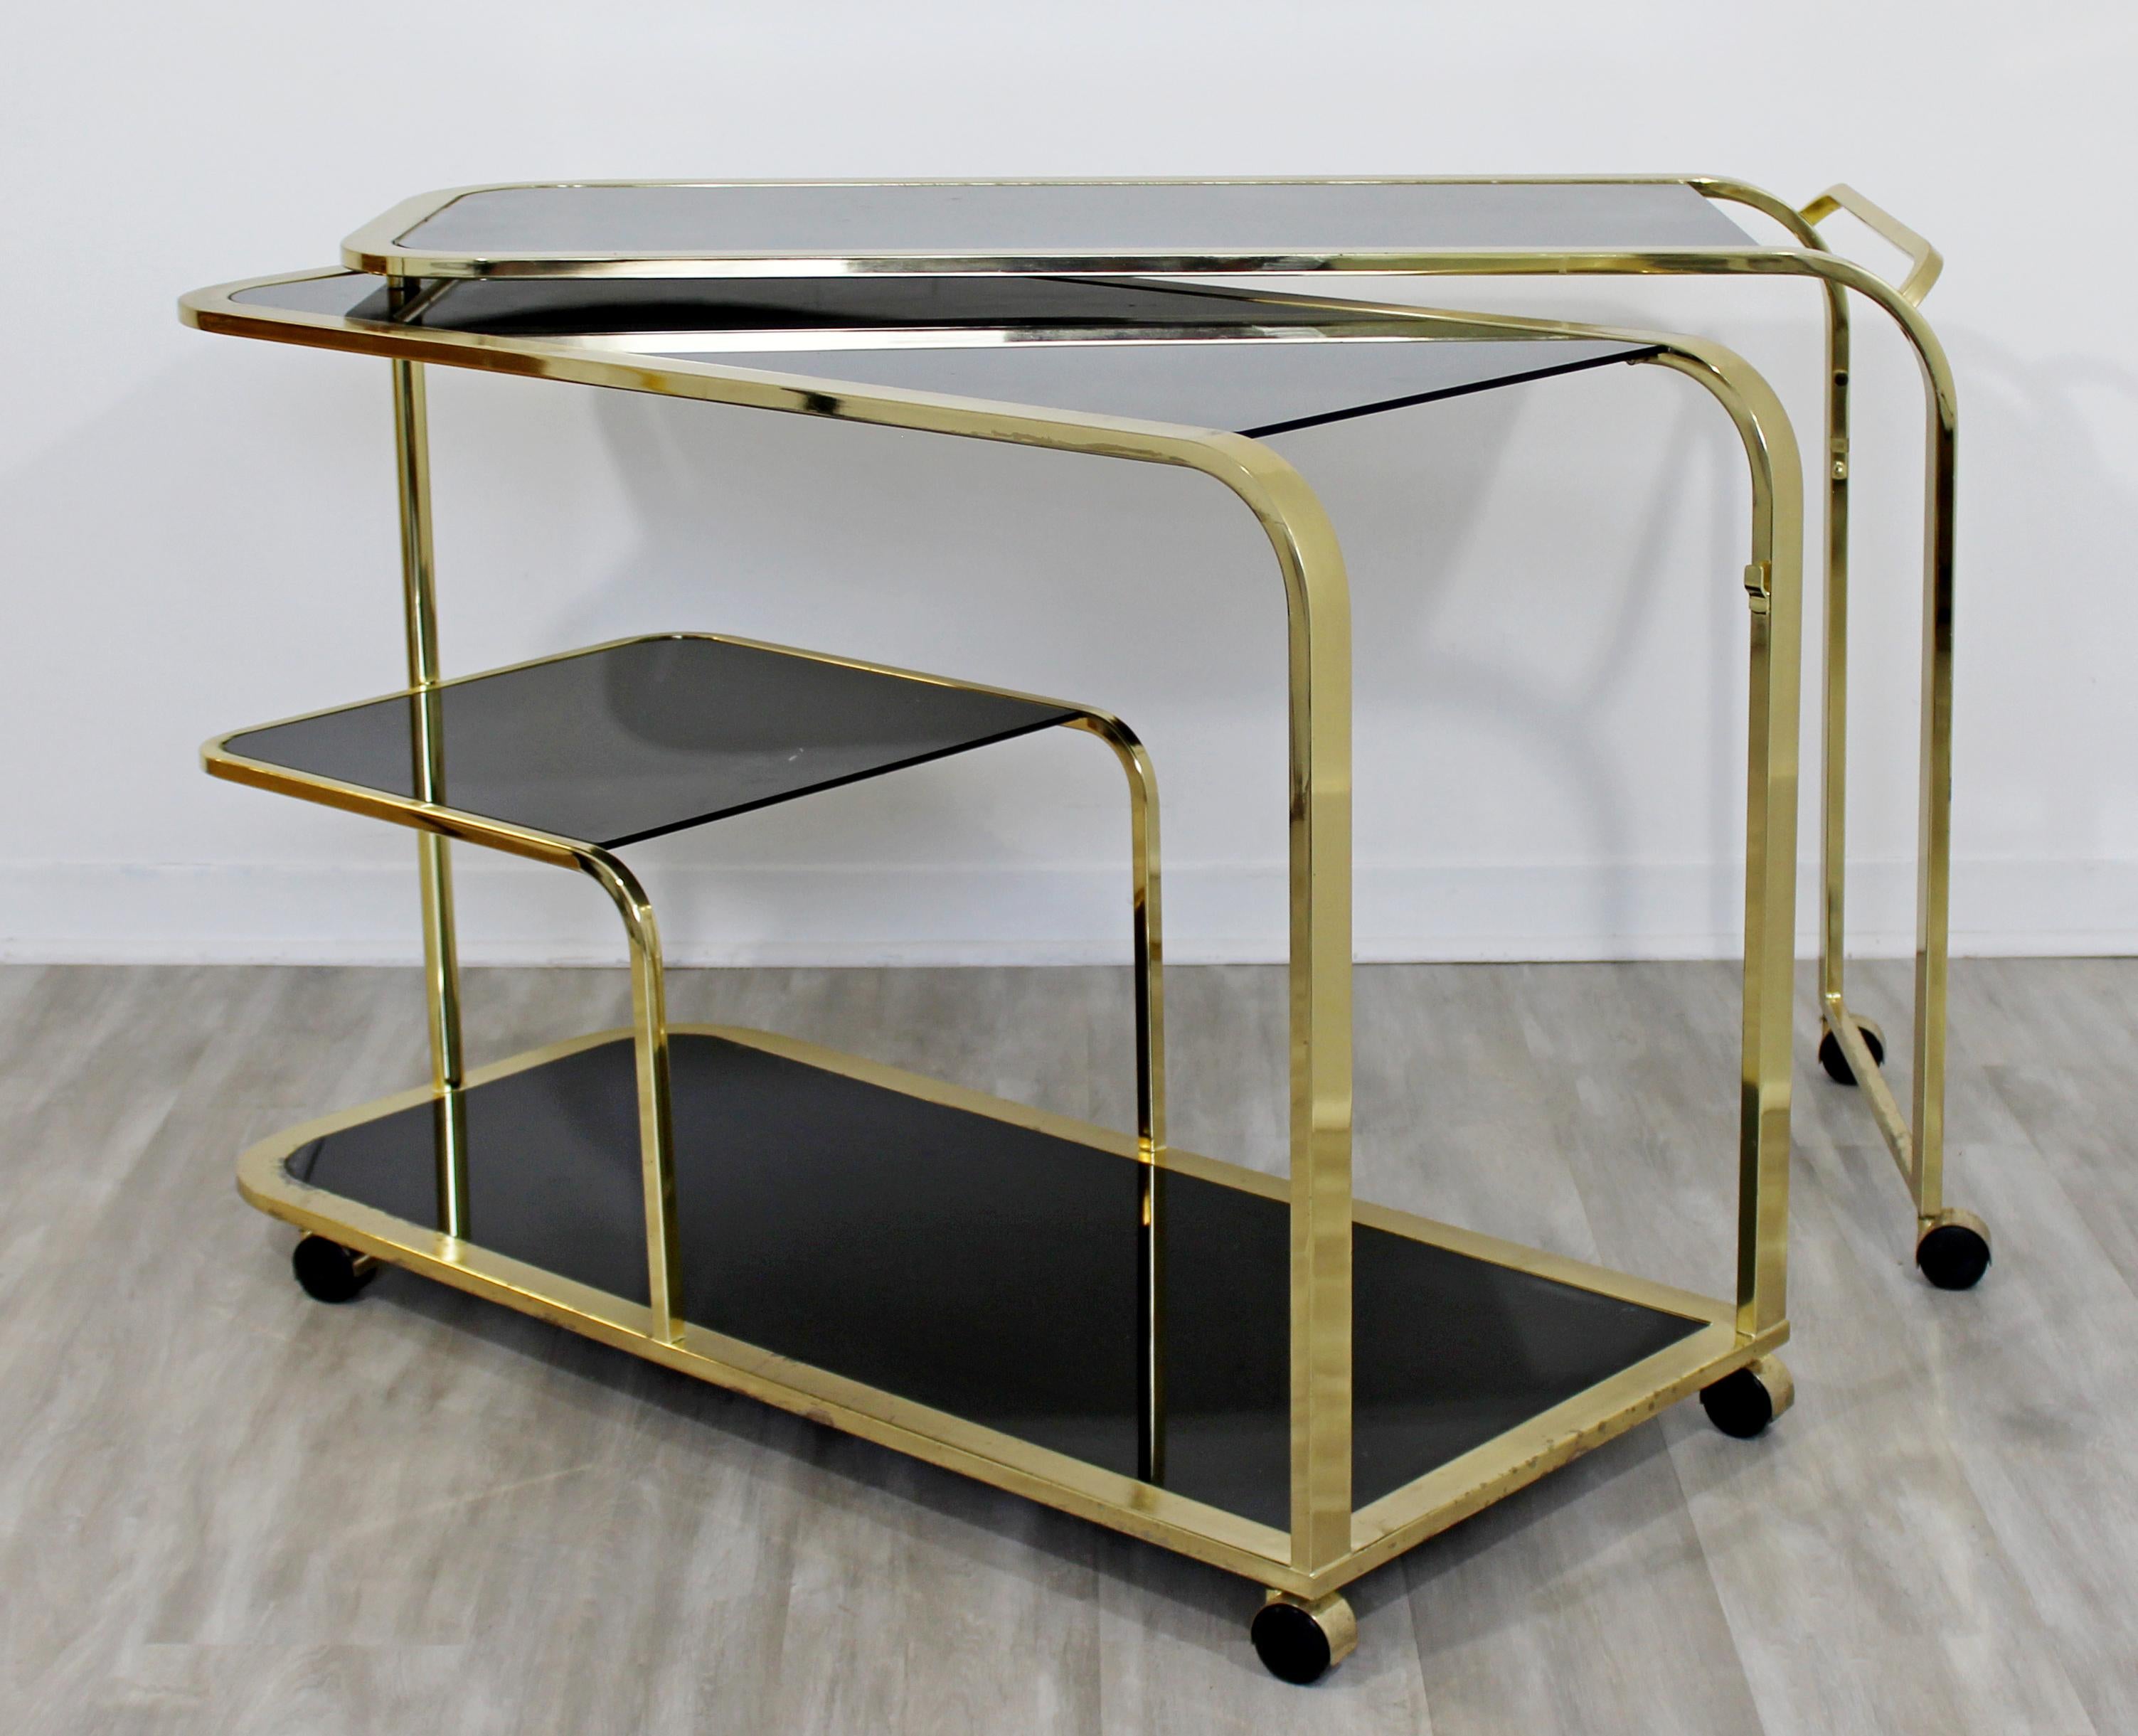 For your consideration is a wonderful, expandable, rolling bar or service cart, with four black glass tops, by The Design Institute of America, circa 1960s. In good vintage condition, with a heavy patina. The dimensions closed are 45